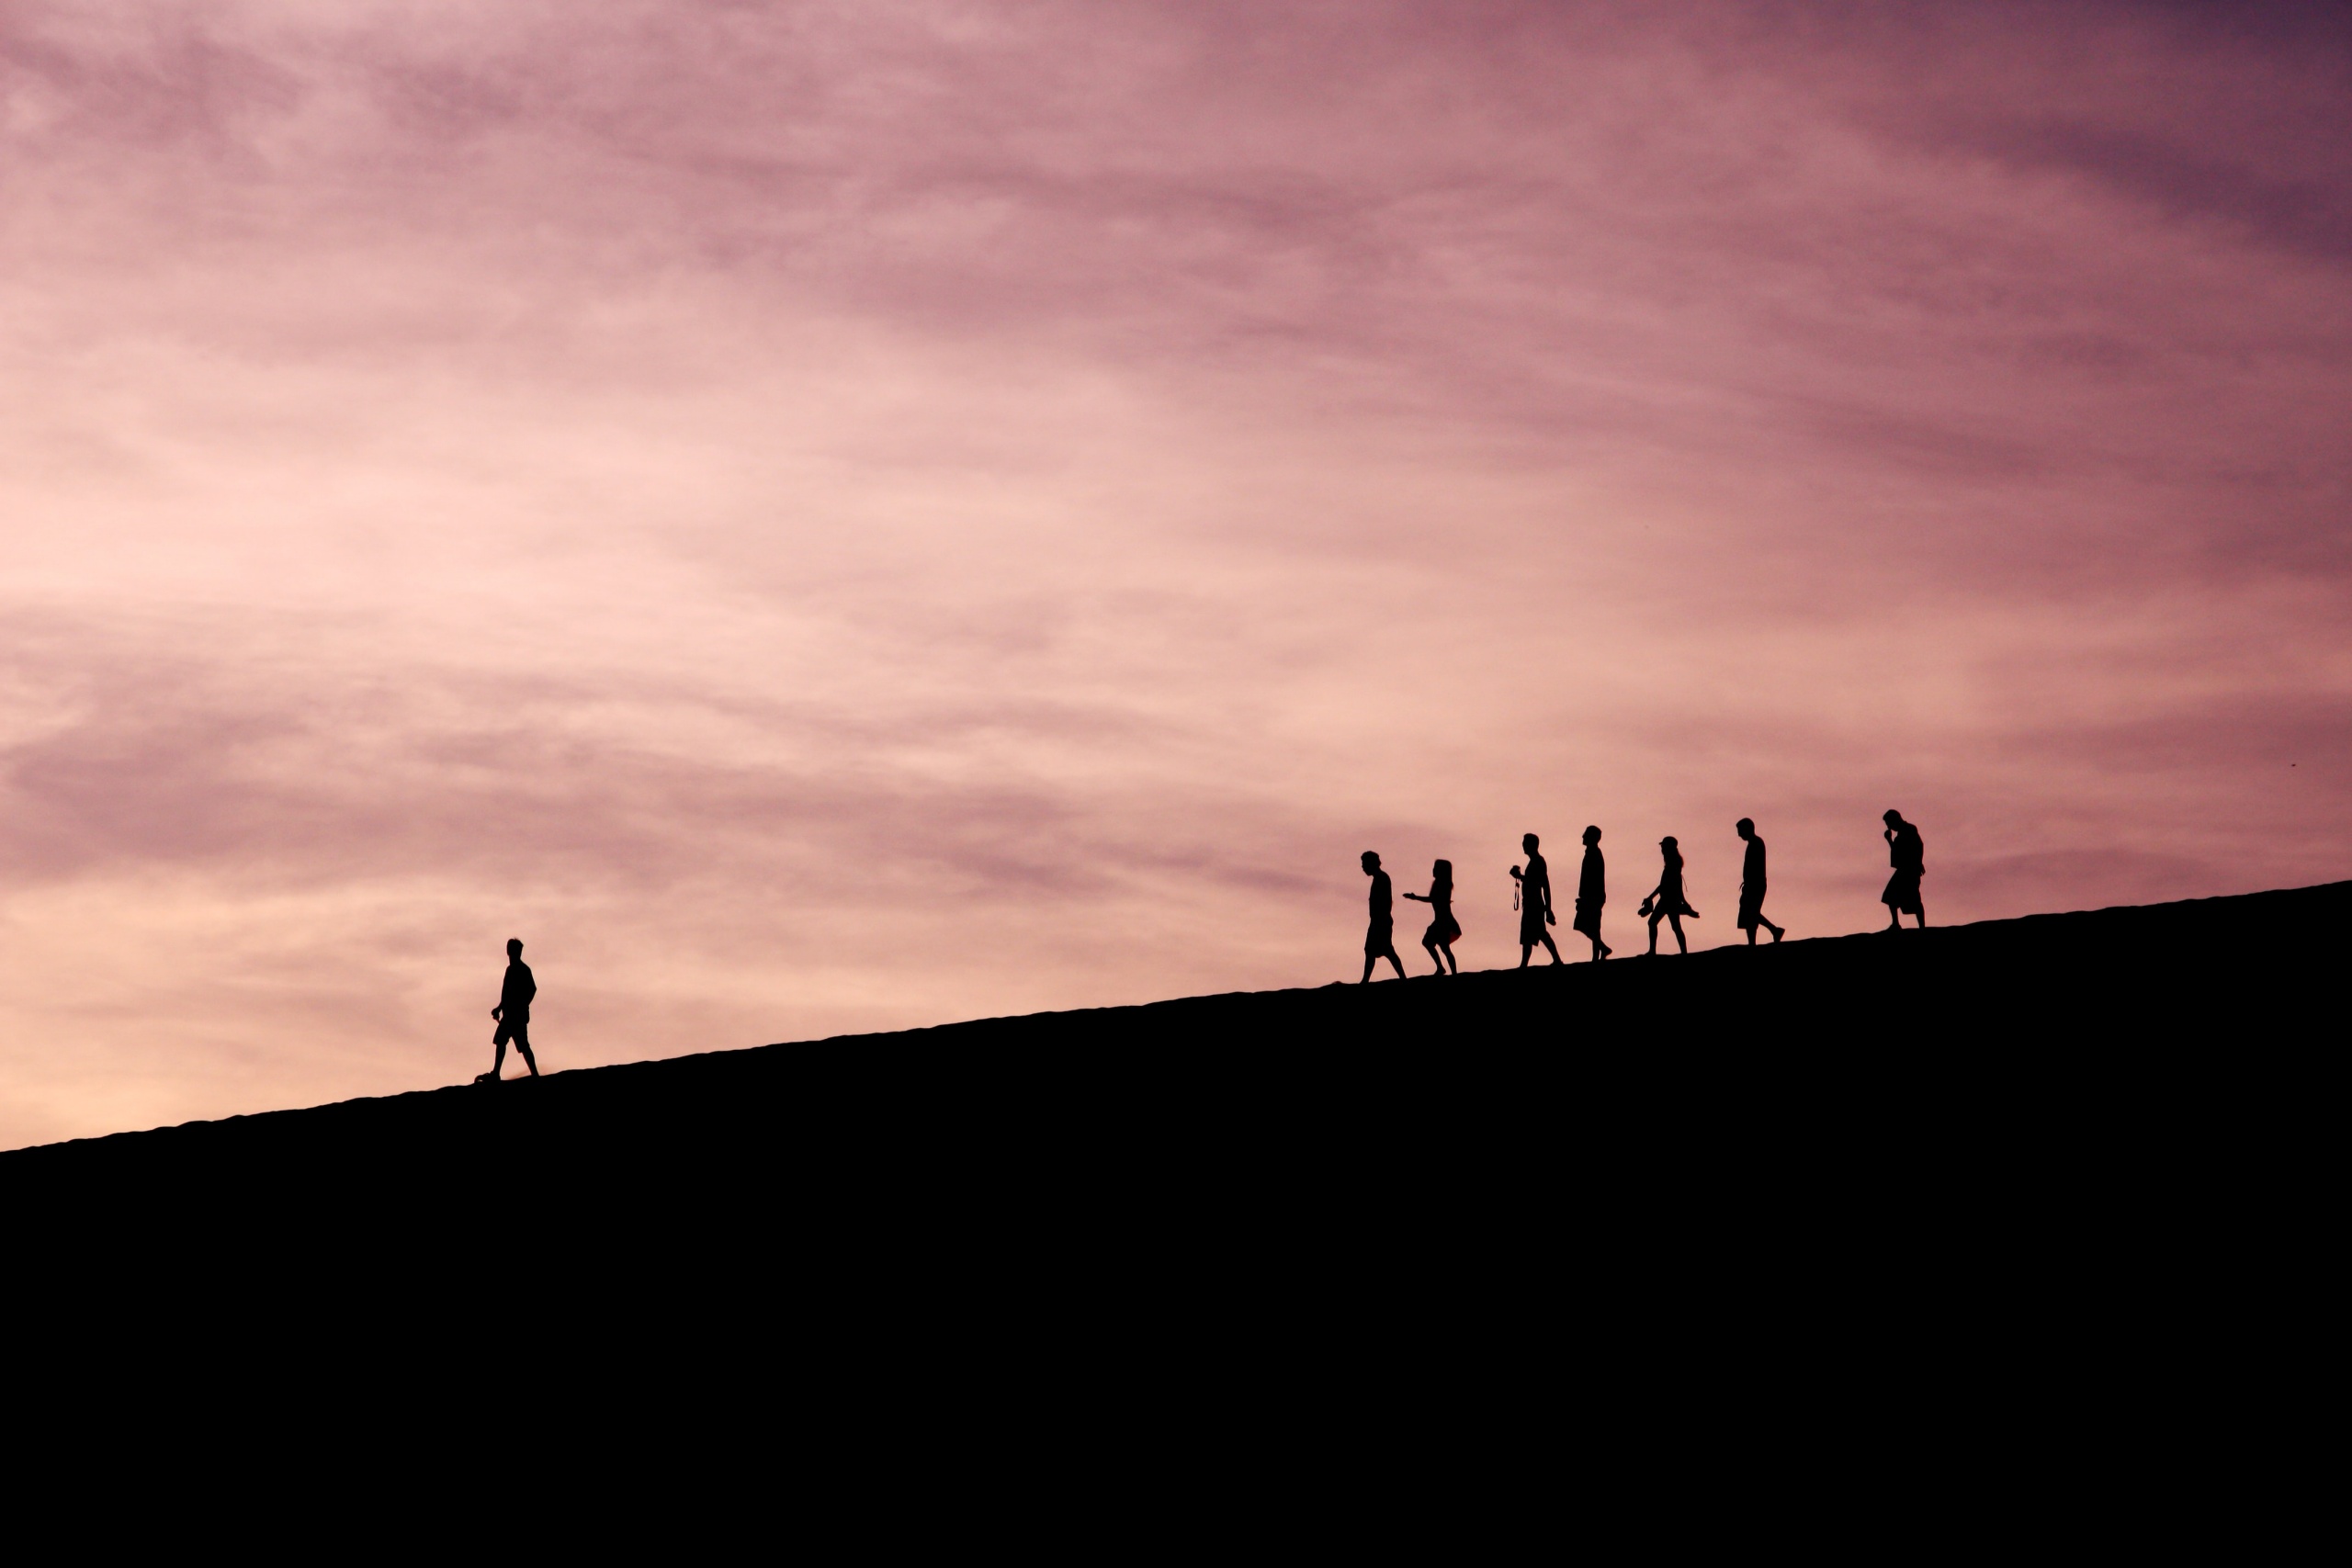 Silhouette of one person leading a group of others down a mountain